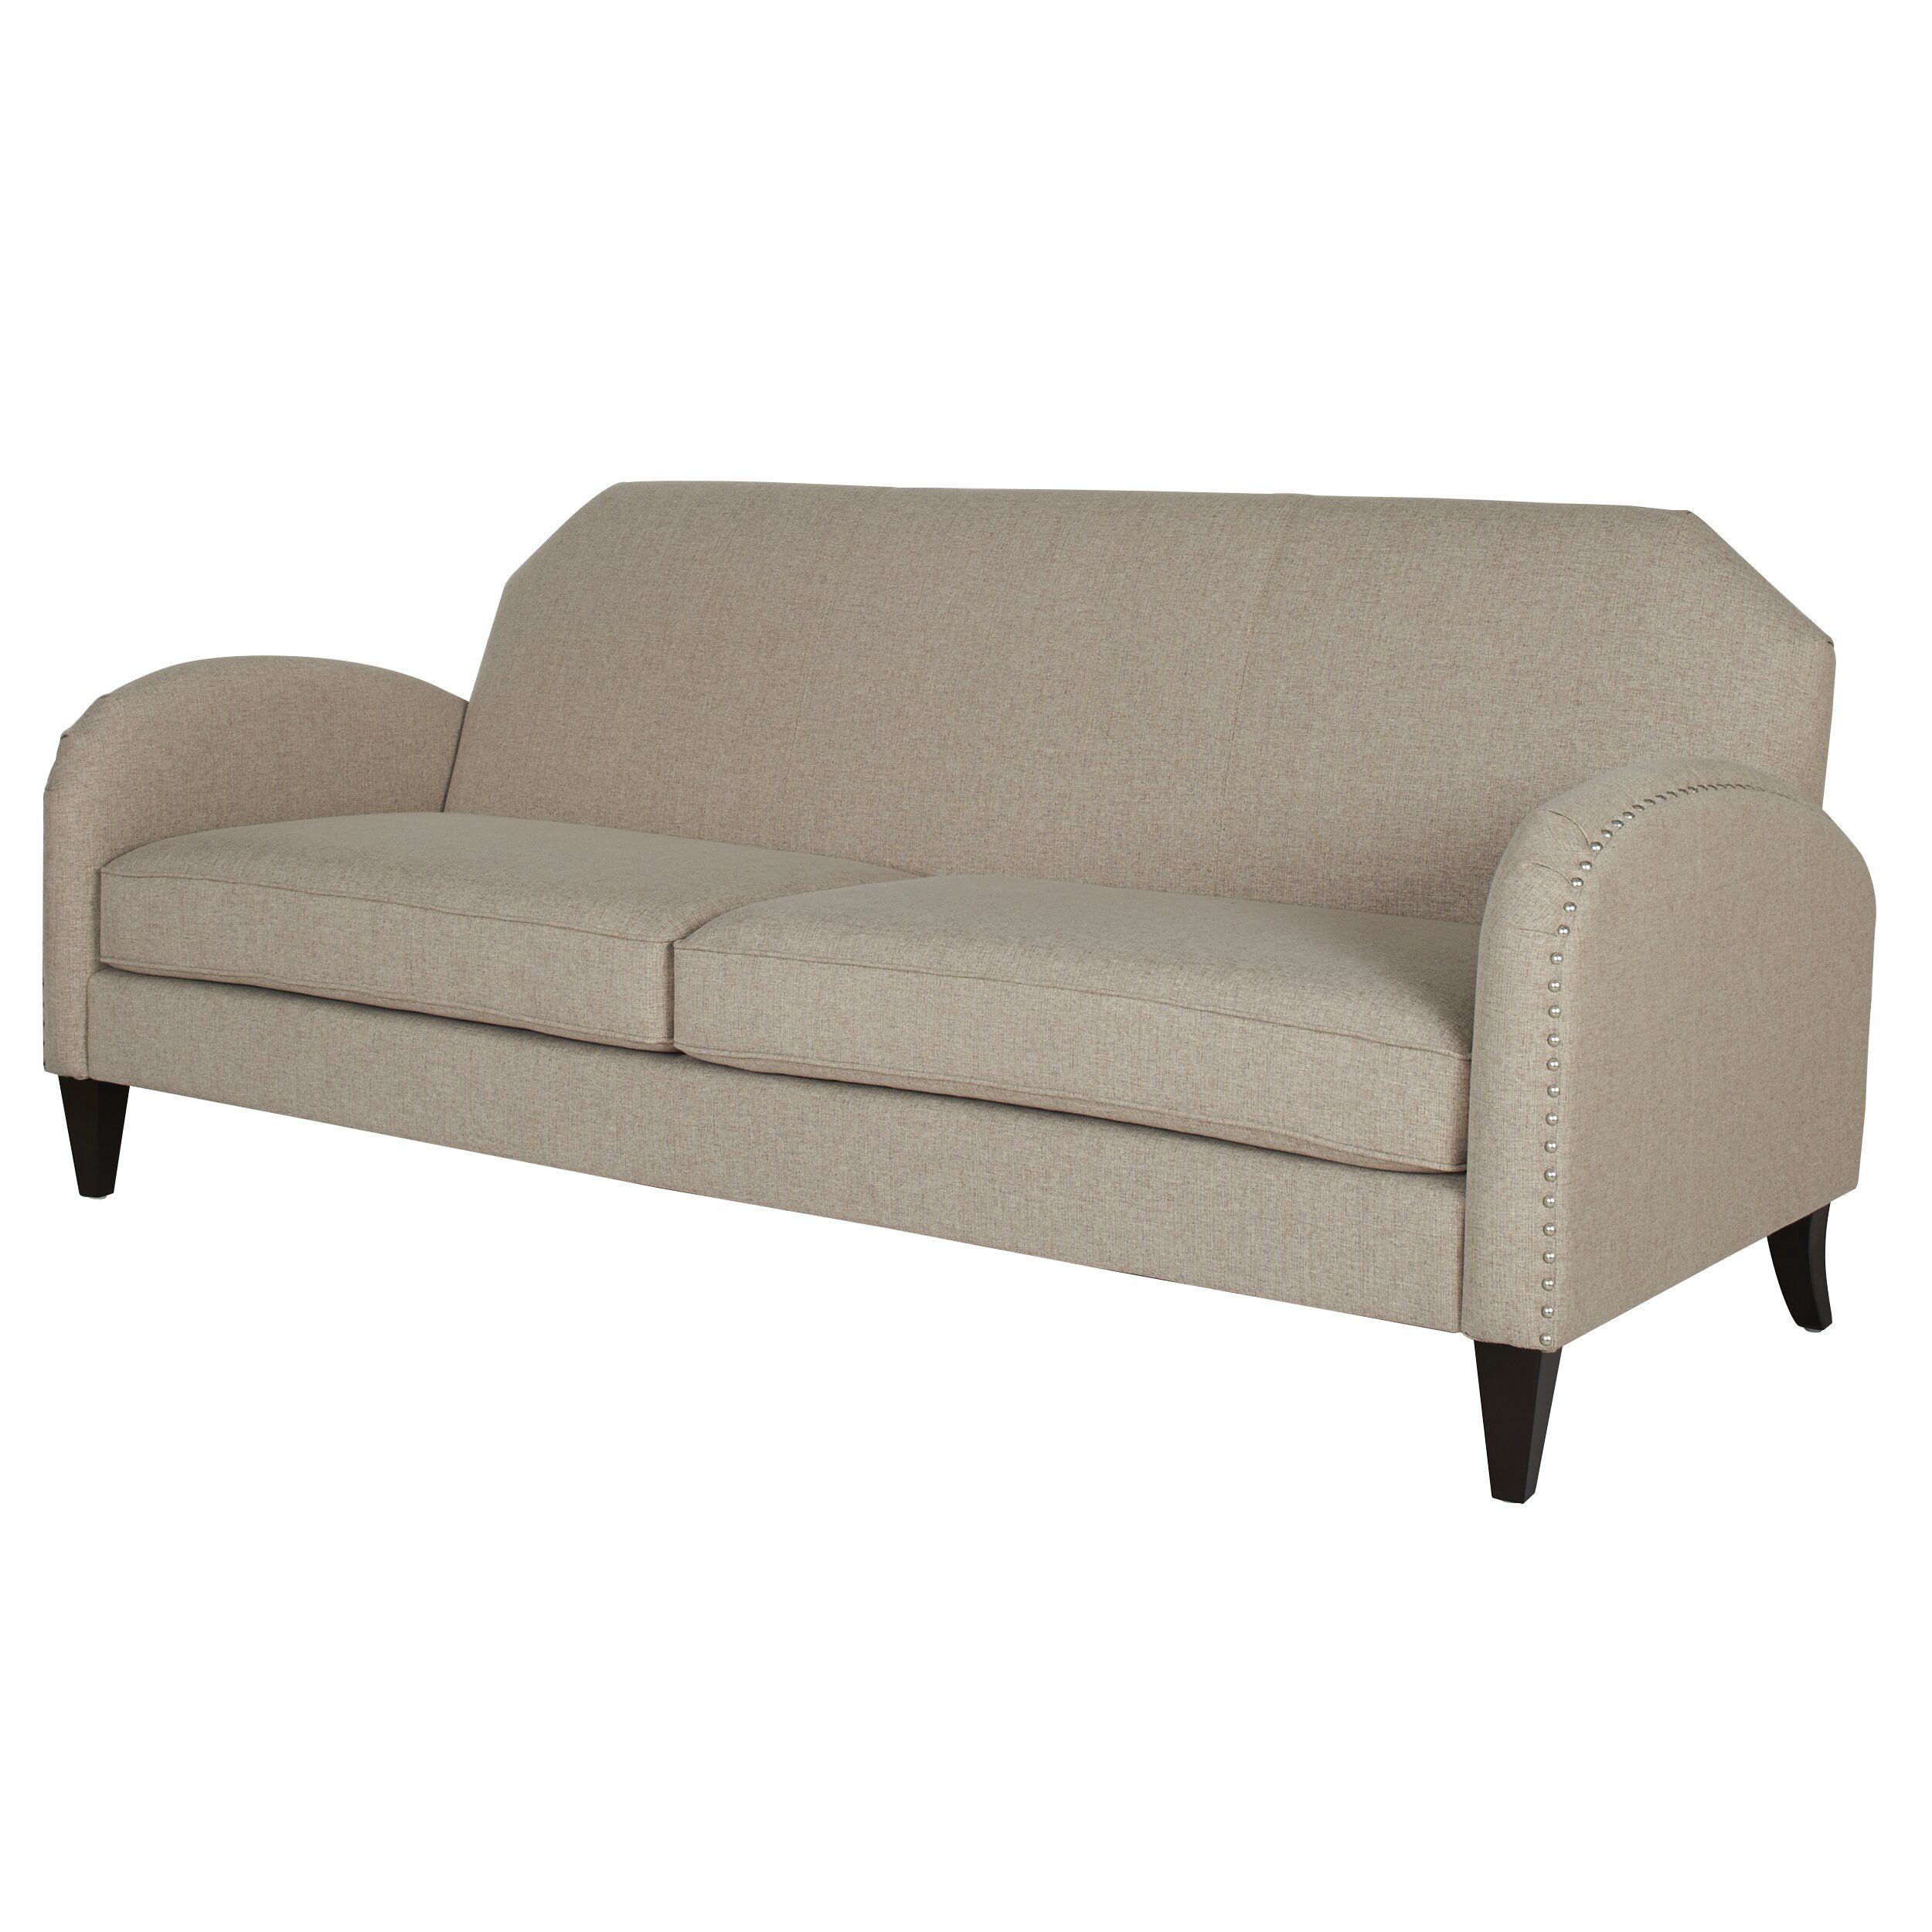 Darby Home Co Ella Unique Curved Arm Sofa | Wayfair Inside Sofas With Curved Arms (Gallery 1 of 20)